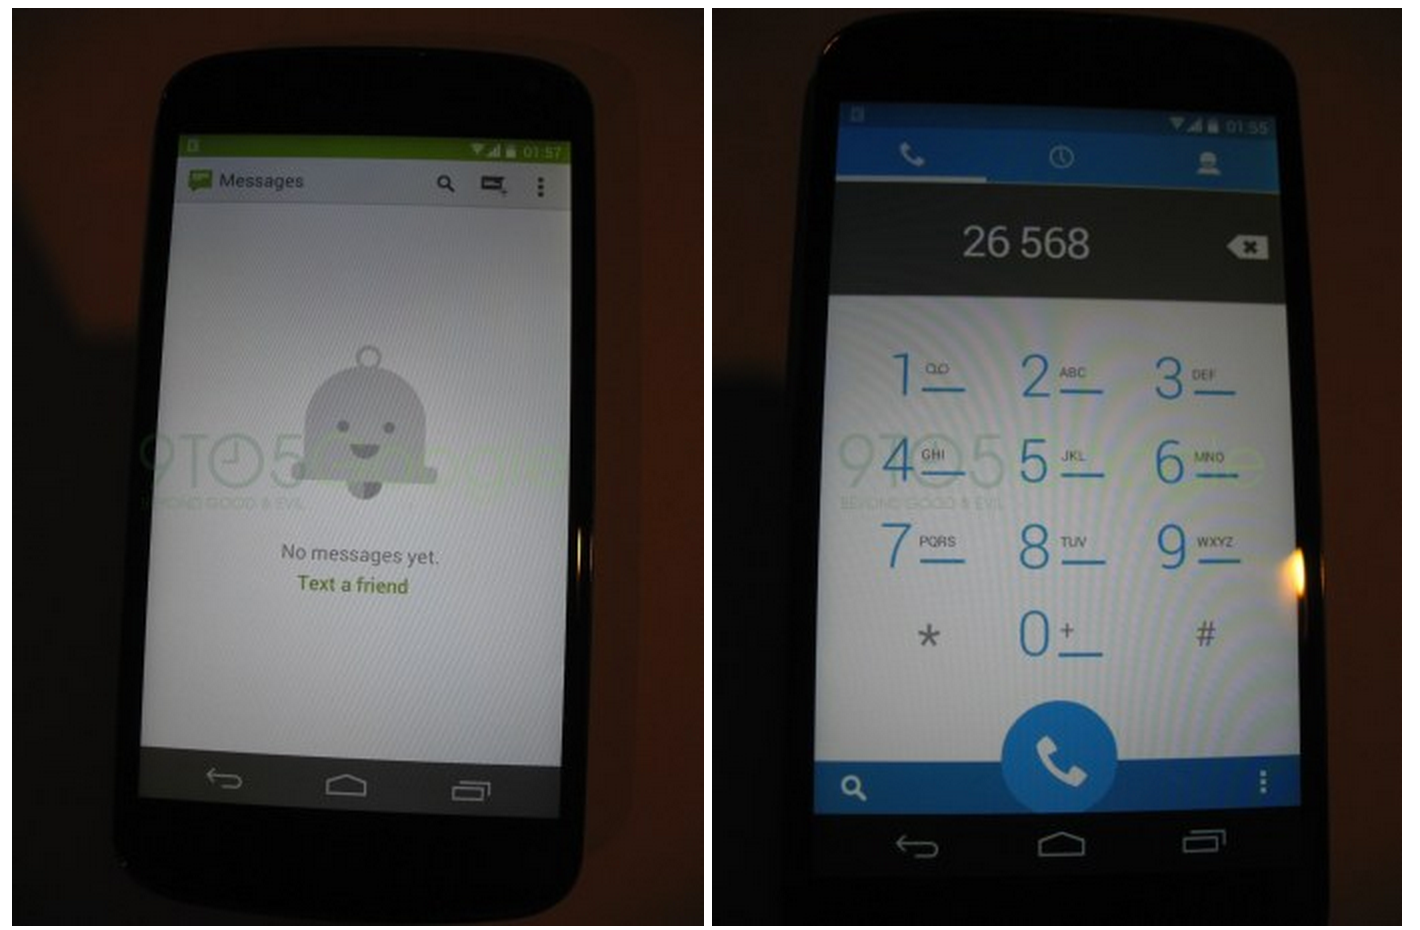 android 4 4 kitkat user interface allegedly leaks image 1